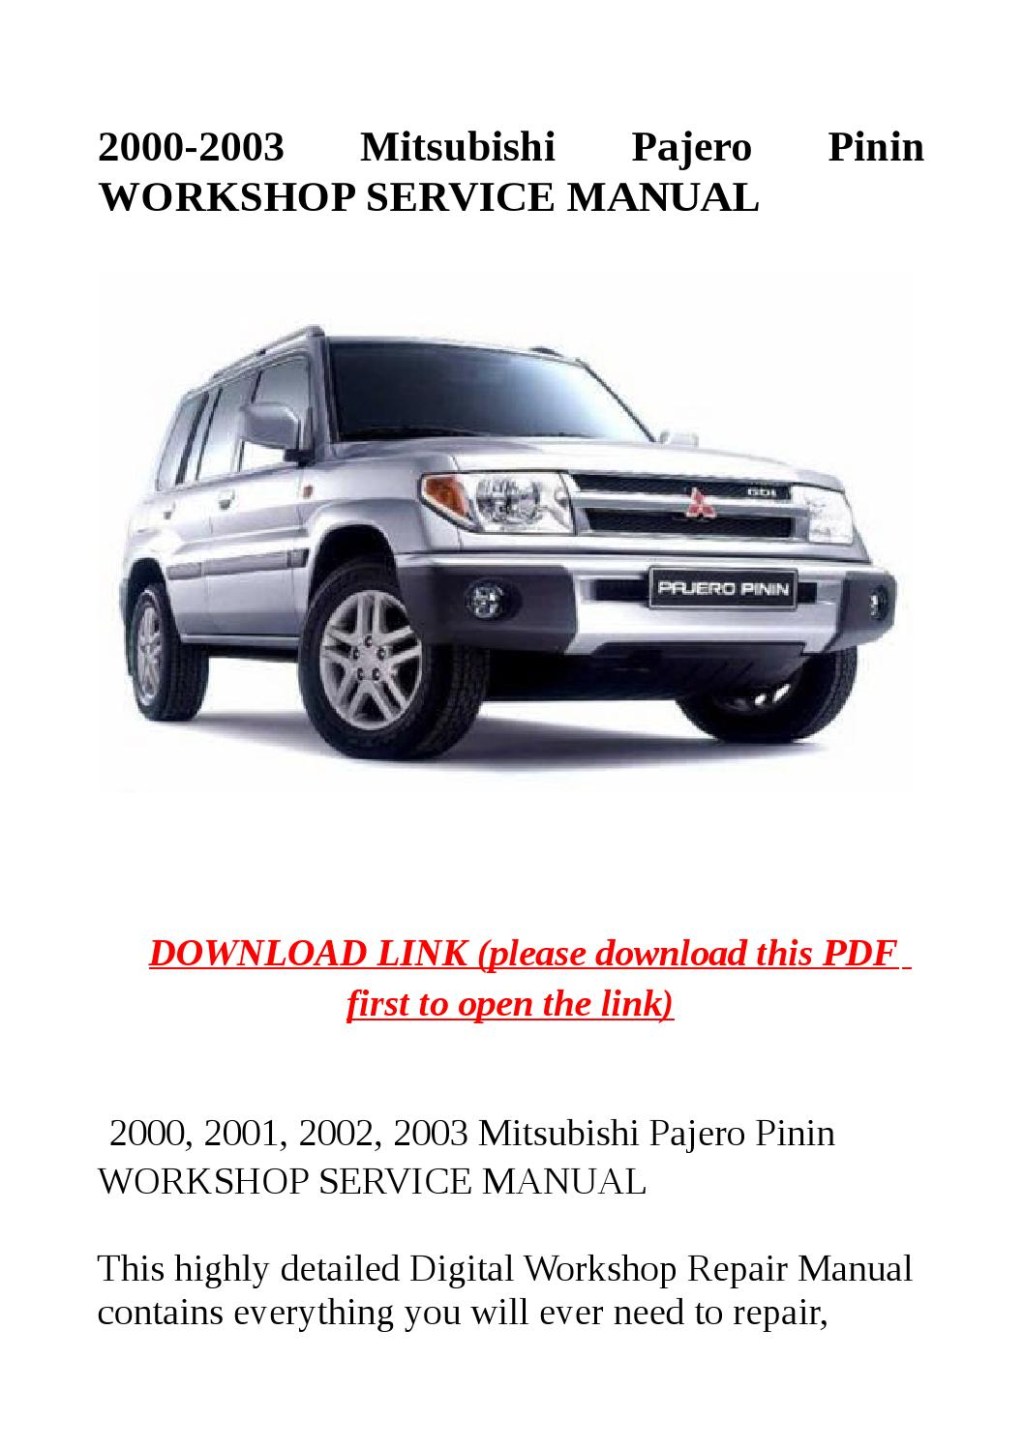 Picture of: mitsubishi pajero pinin workshop service manual by Jacky